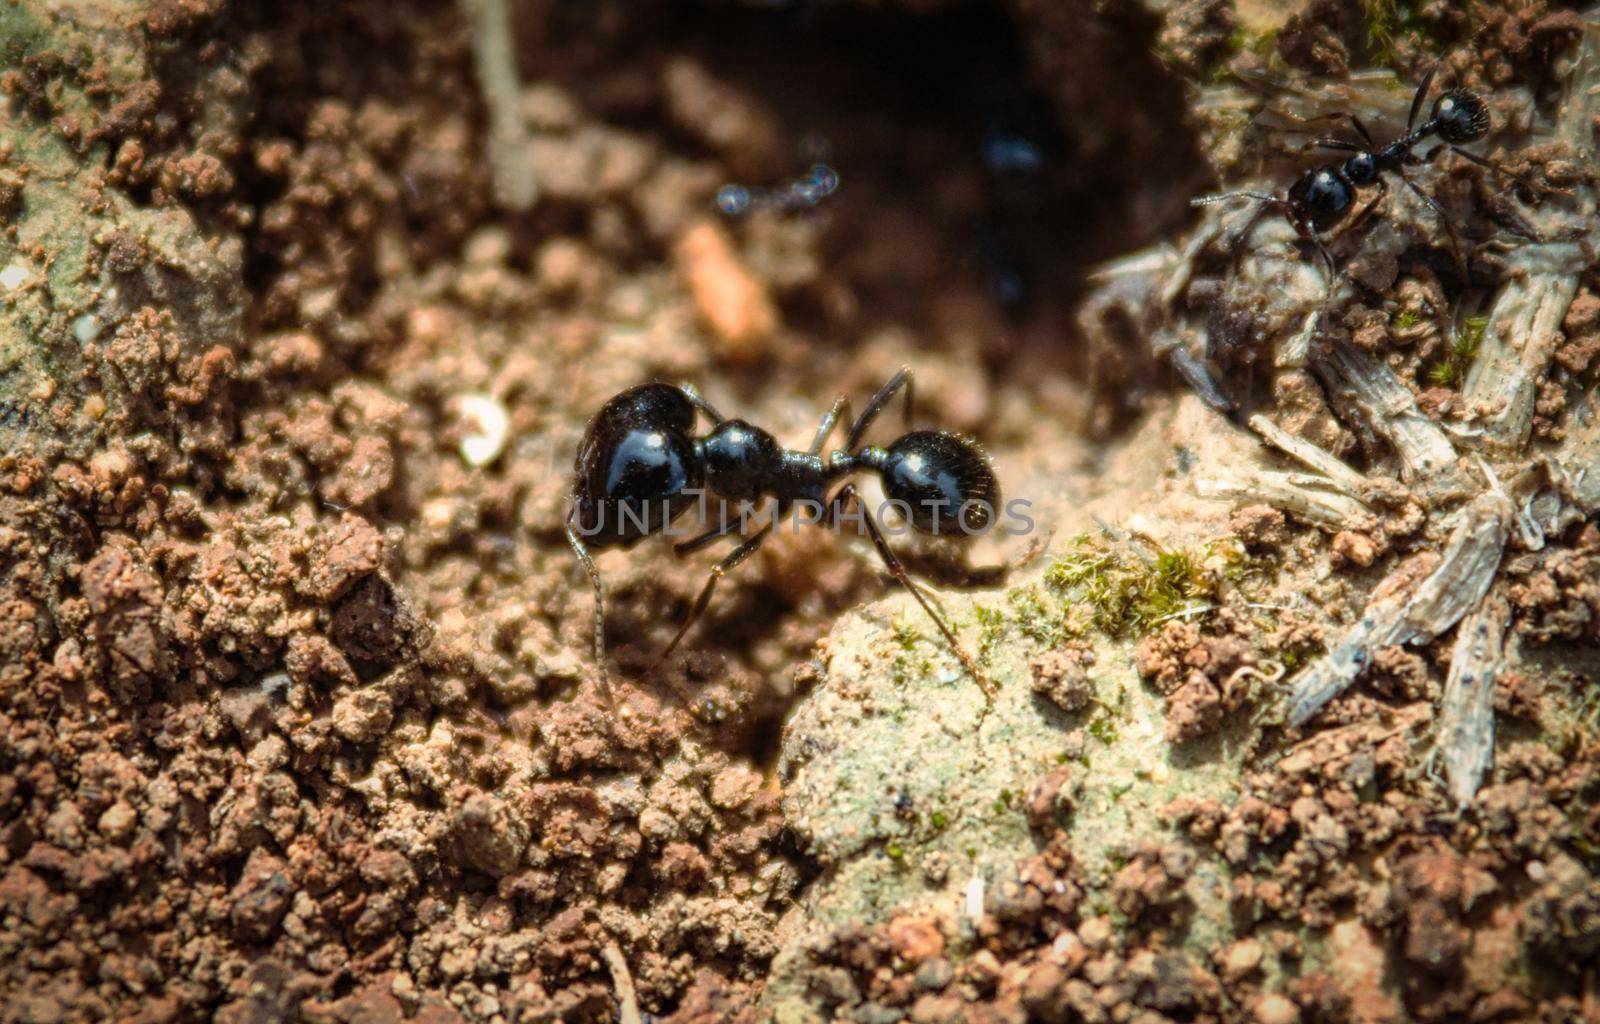 Big-headed soldier ant at the mouth of an ant's nest by tennesseewitney